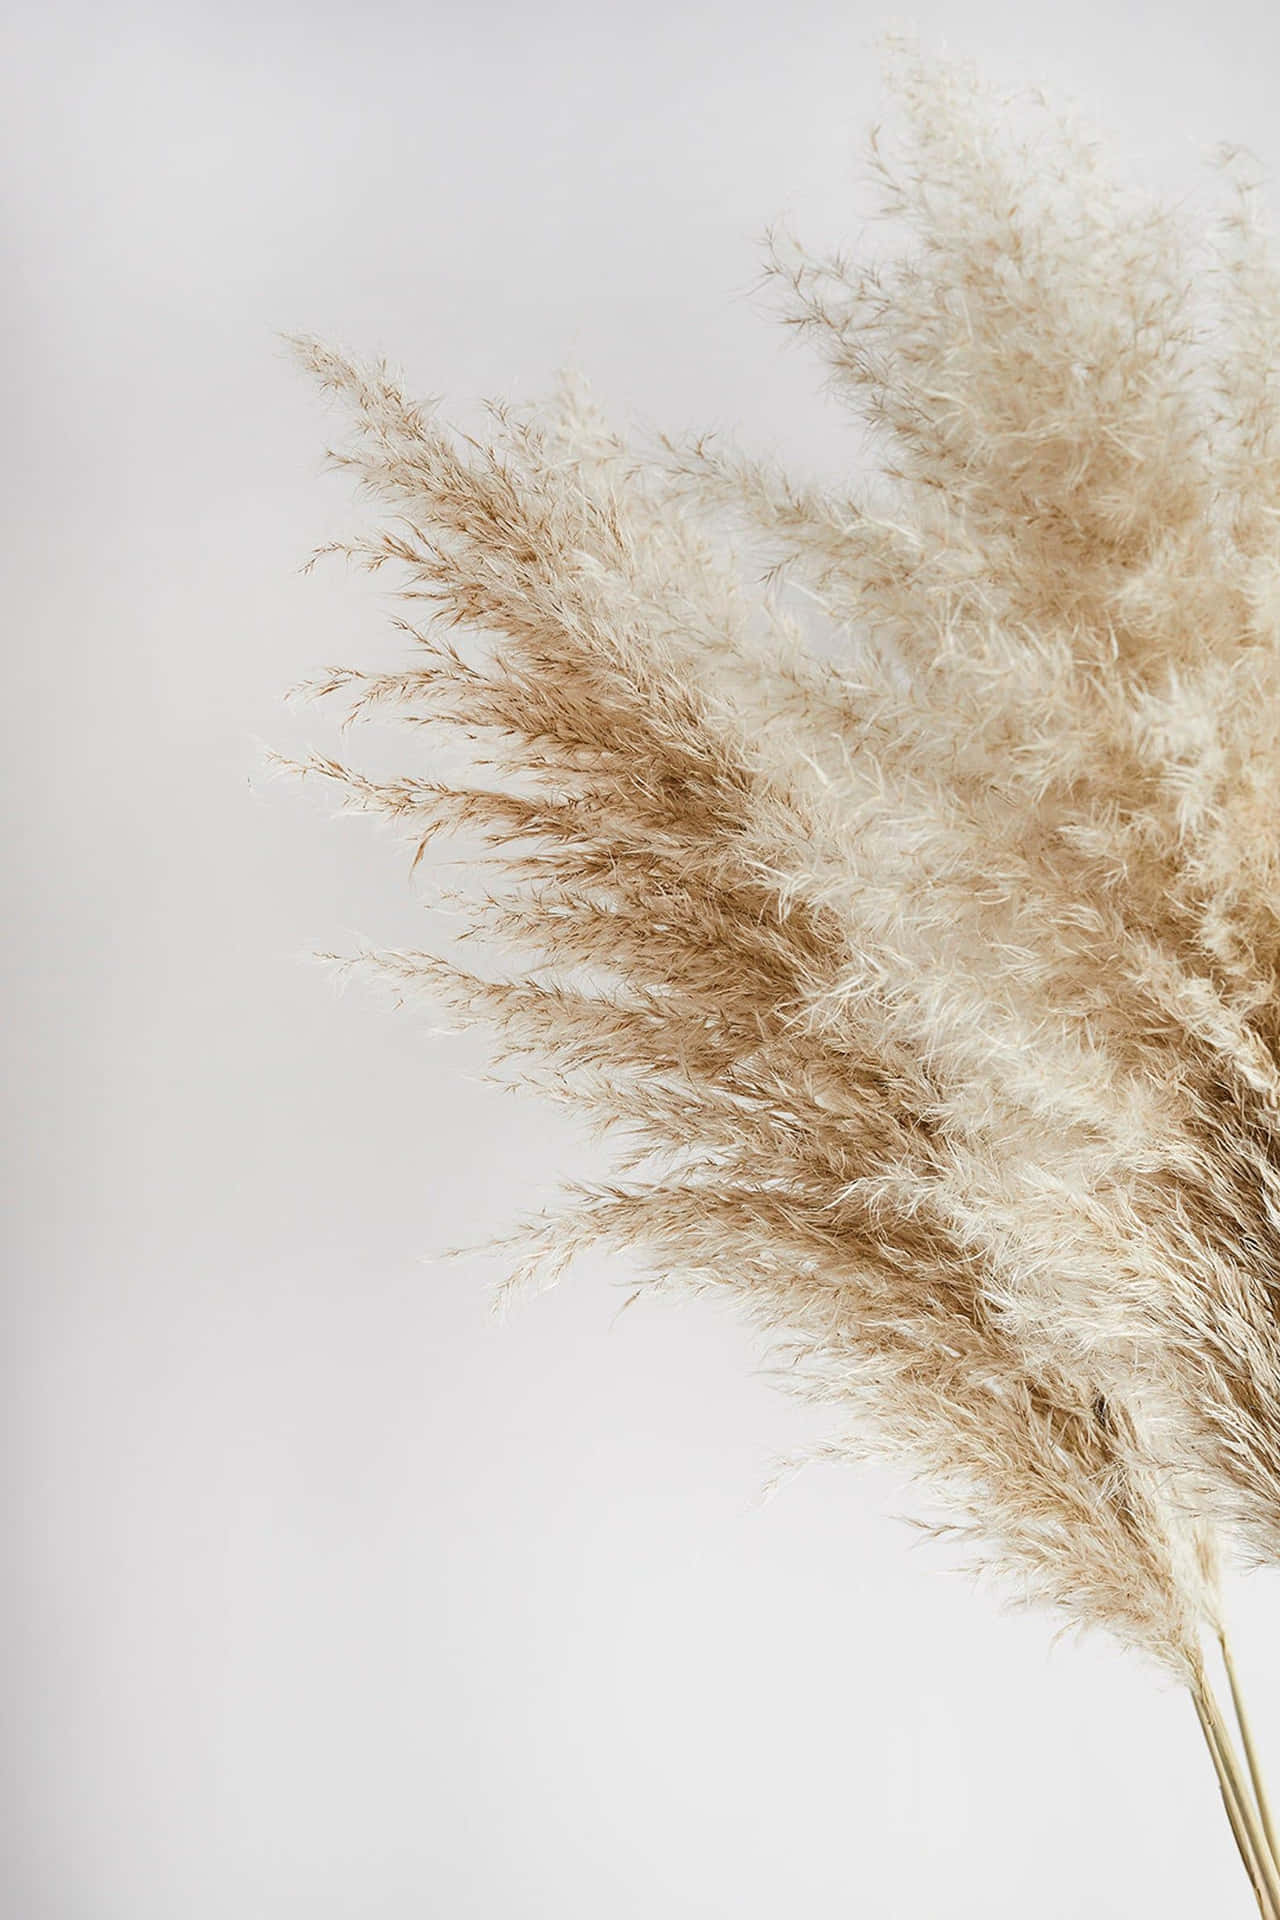 A Vase Of Dried Grass On A White Background Wallpaper